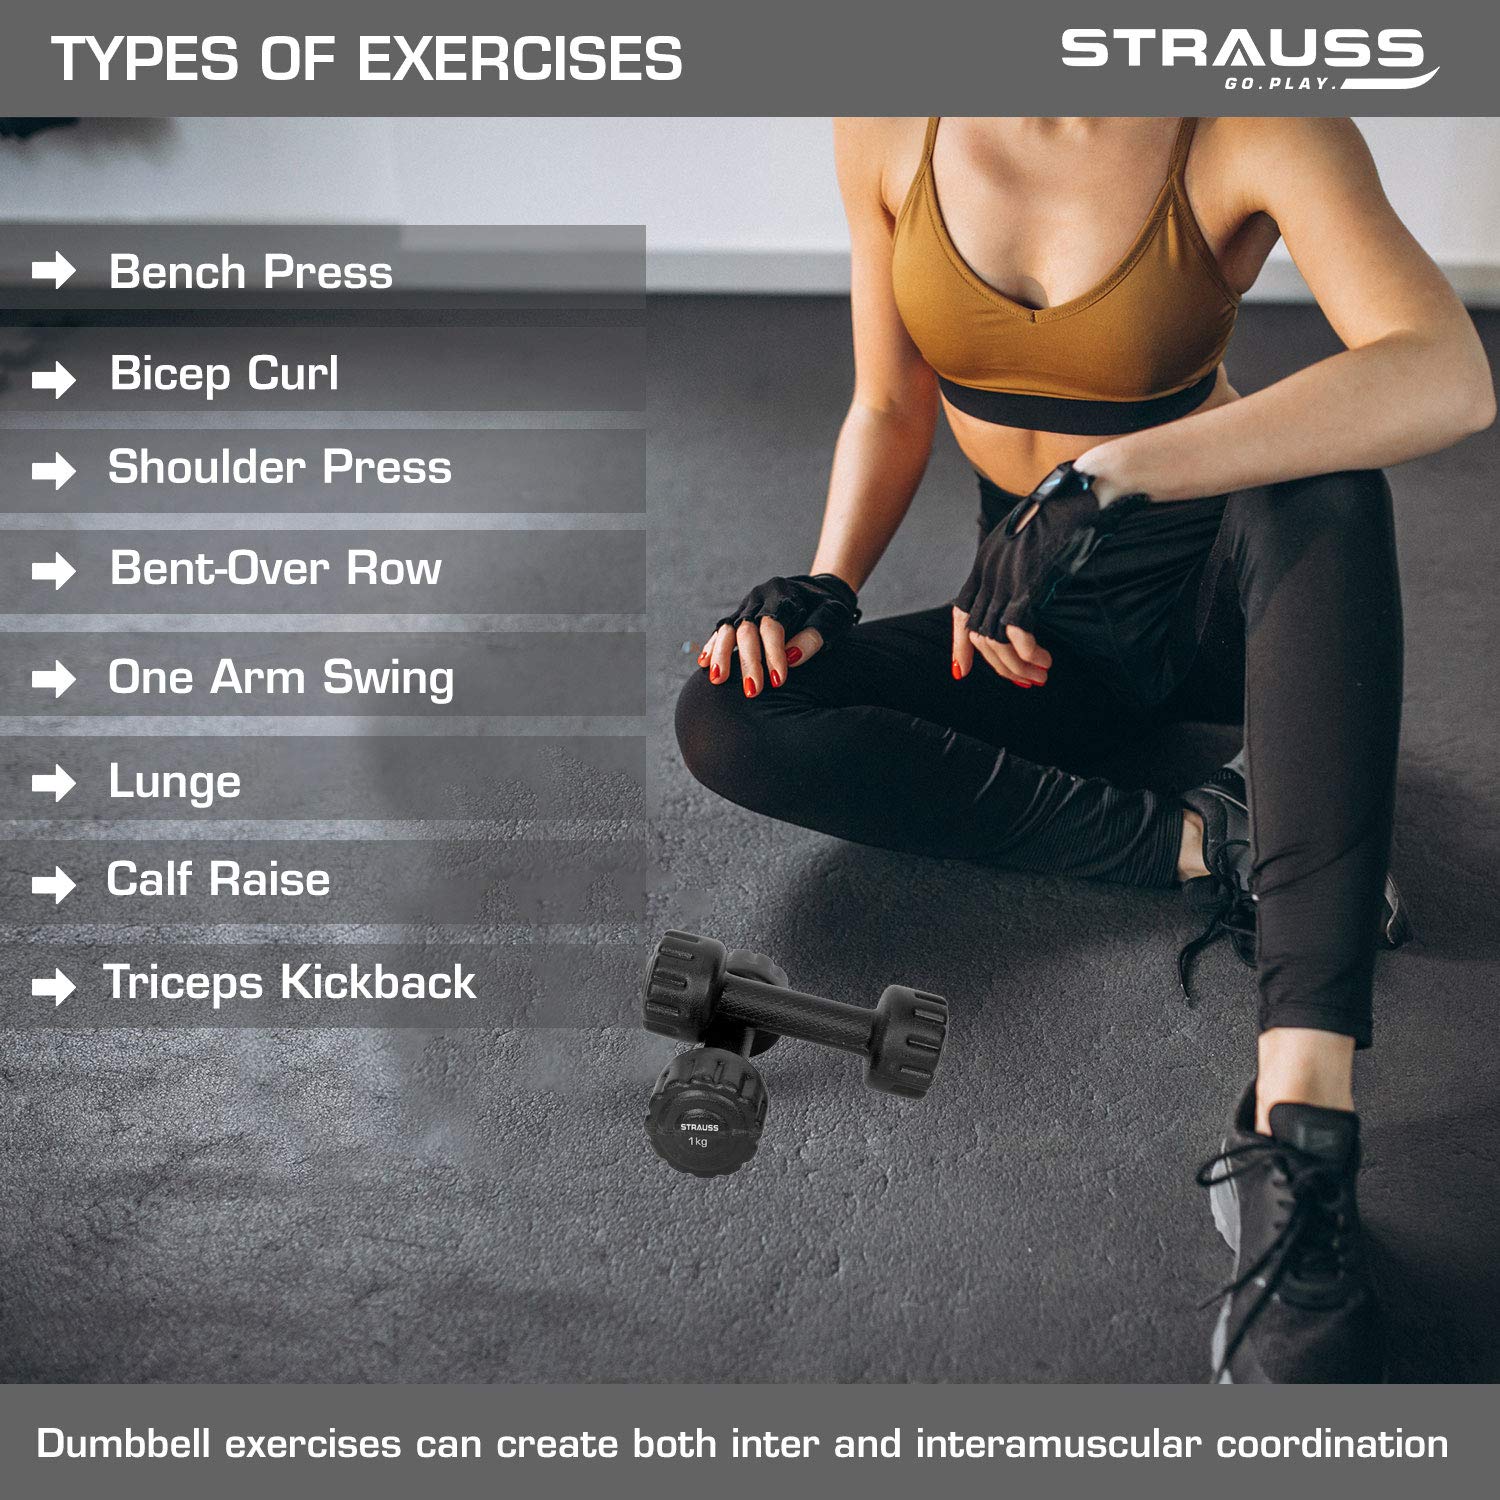 Strauss Unisex PVC Dumbbells Weight for Men & Women | 1Kg (Each)| 2Kg (Pair) | Ideal for Home Workout and Gym Exercises (Black)